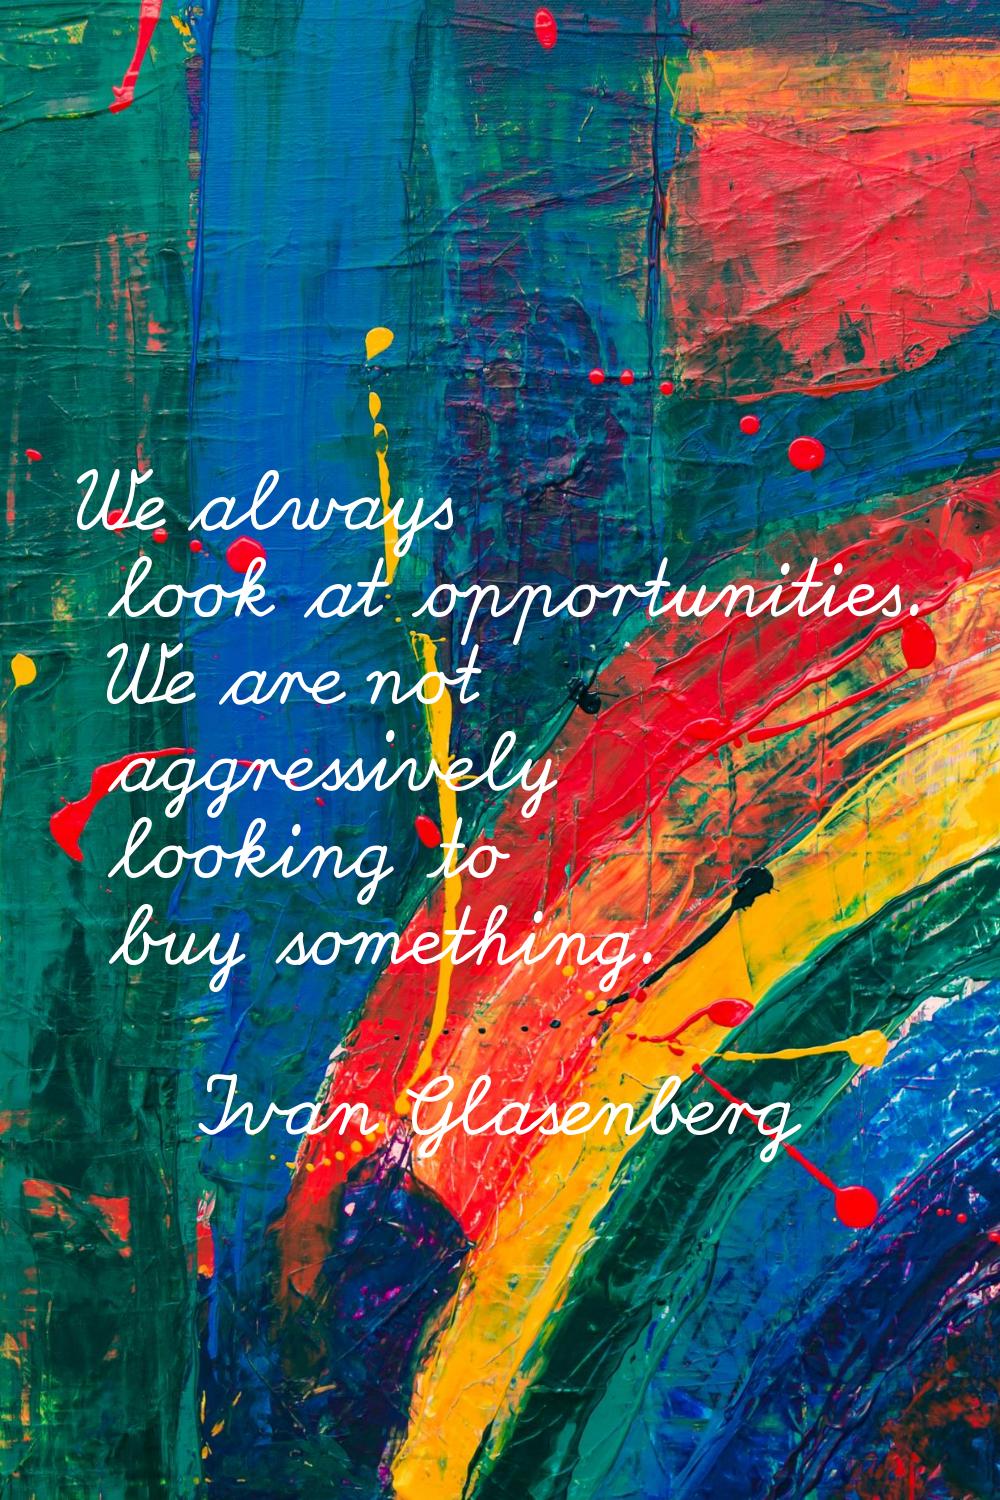 We always look at opportunities. We are not aggressively looking to buy something.